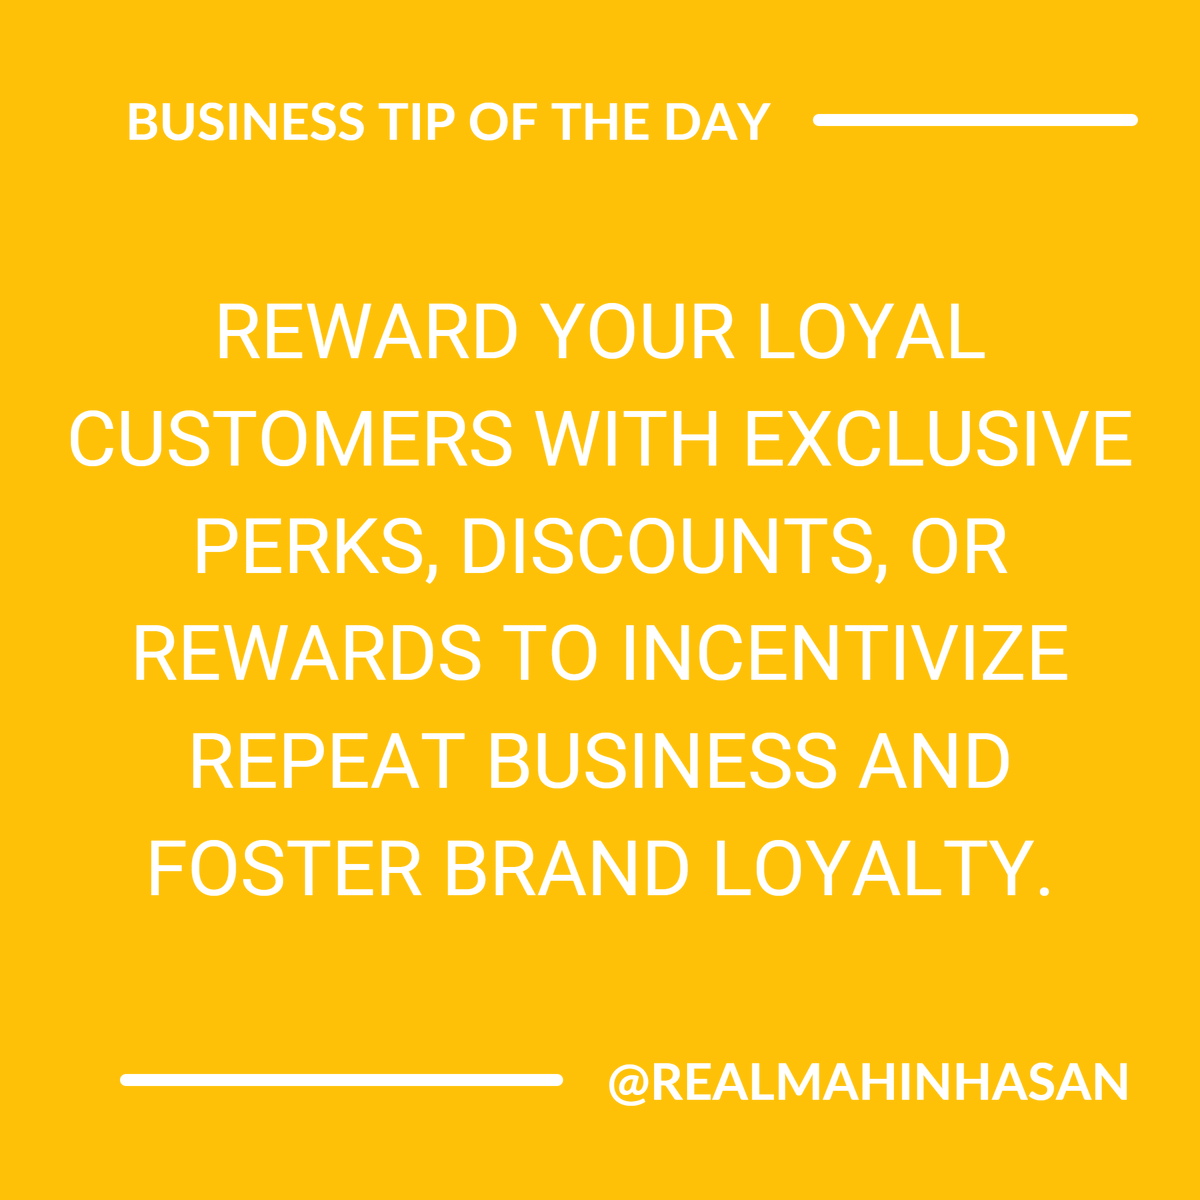 Create a loyalty program to reward customers and incentivize repeat business. #LoyaltyPrograms #RepeatBusiness